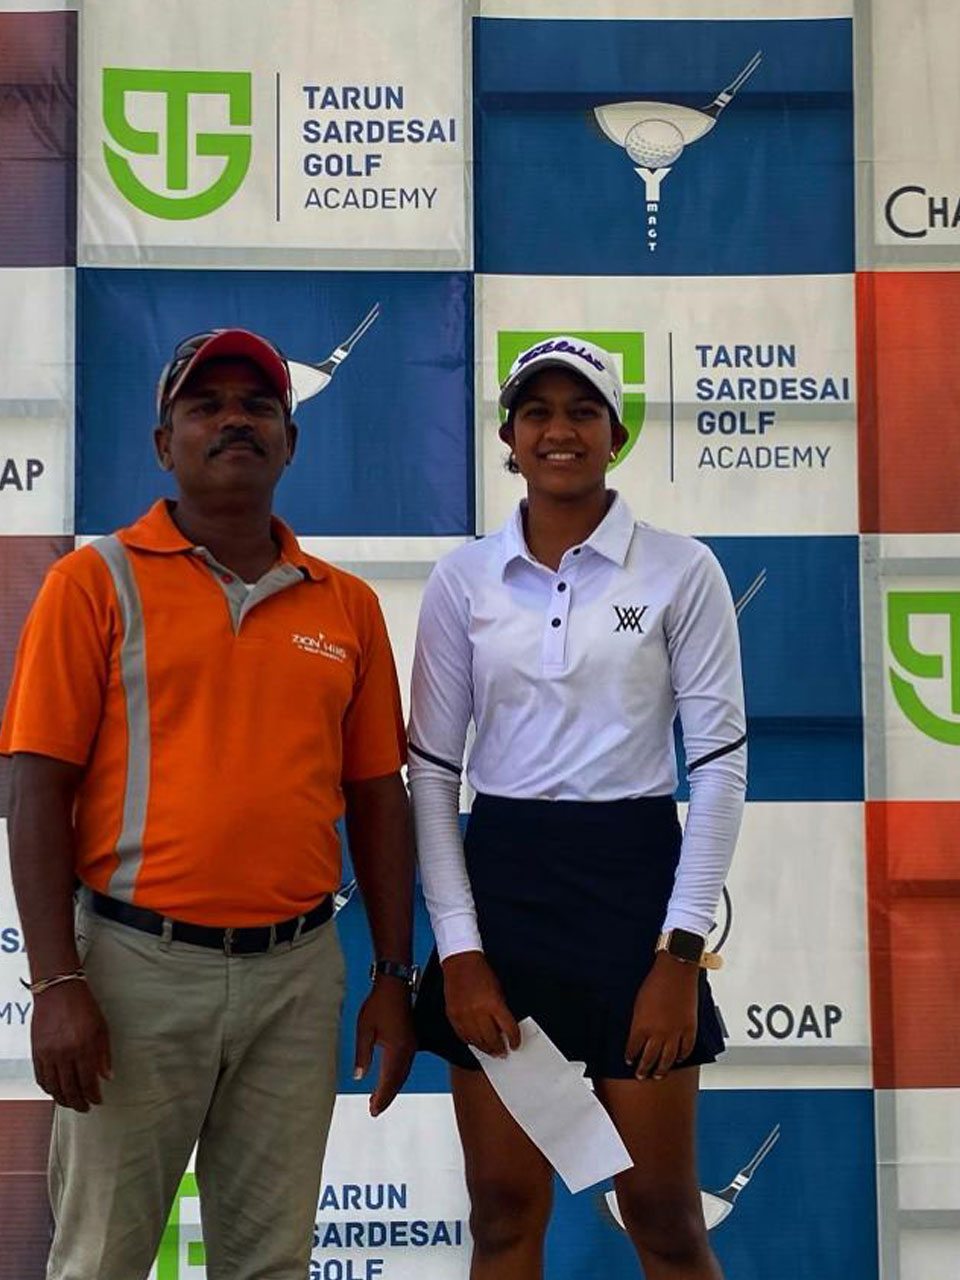 Dia Cris Kumar finished 2nd in the Women's Open Amateur Category